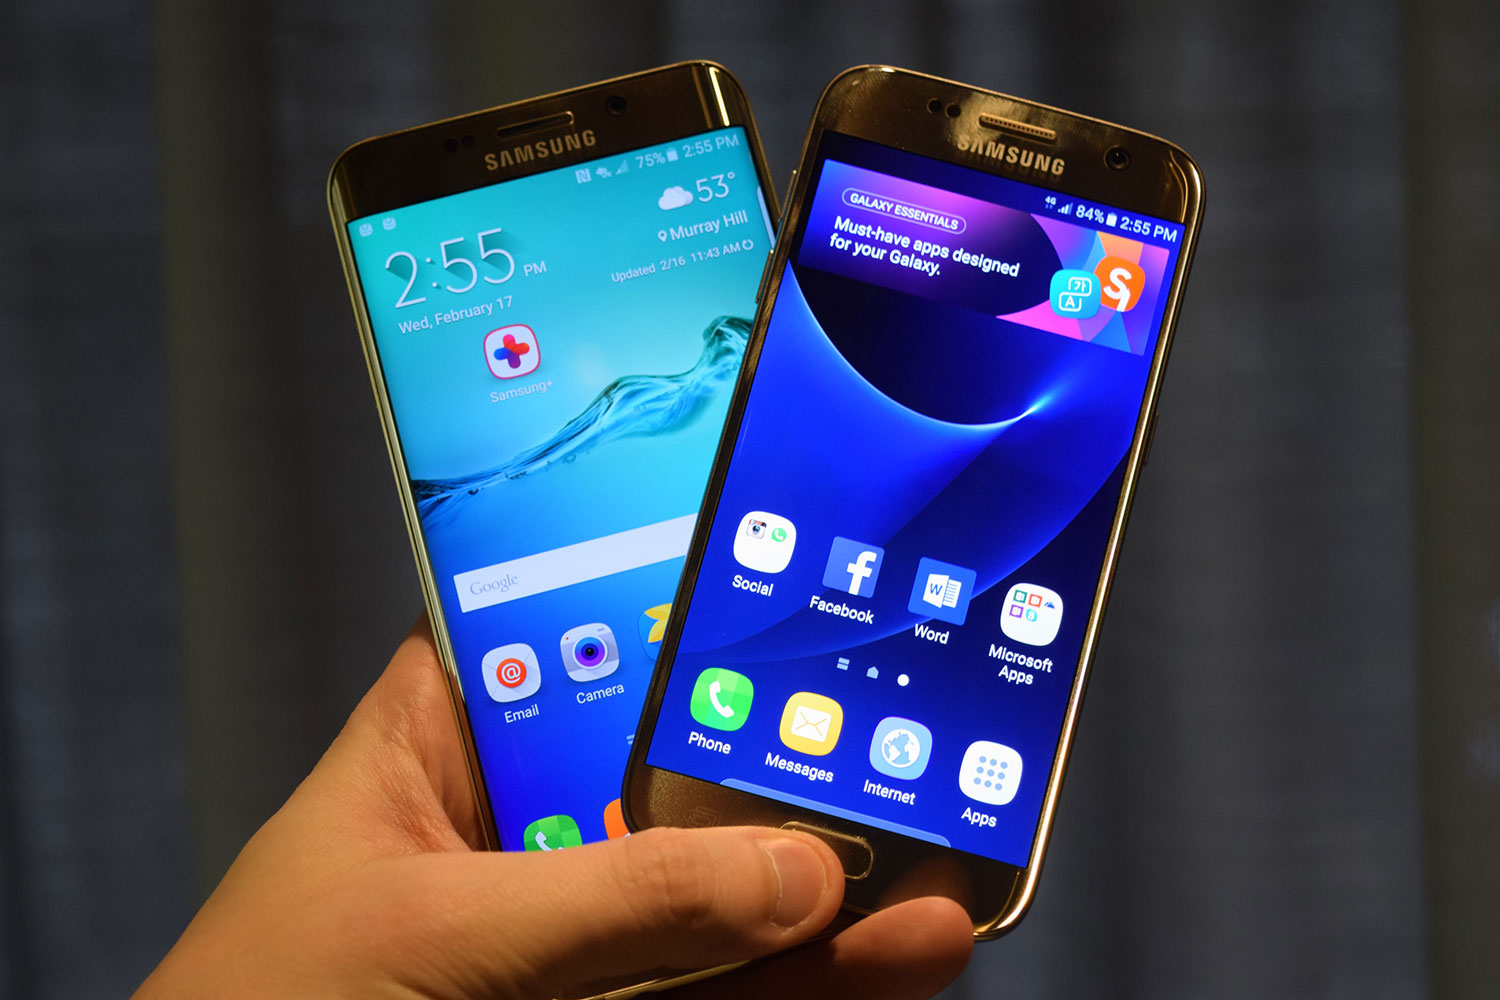 samsung galaxy s7 news and edge together in hand